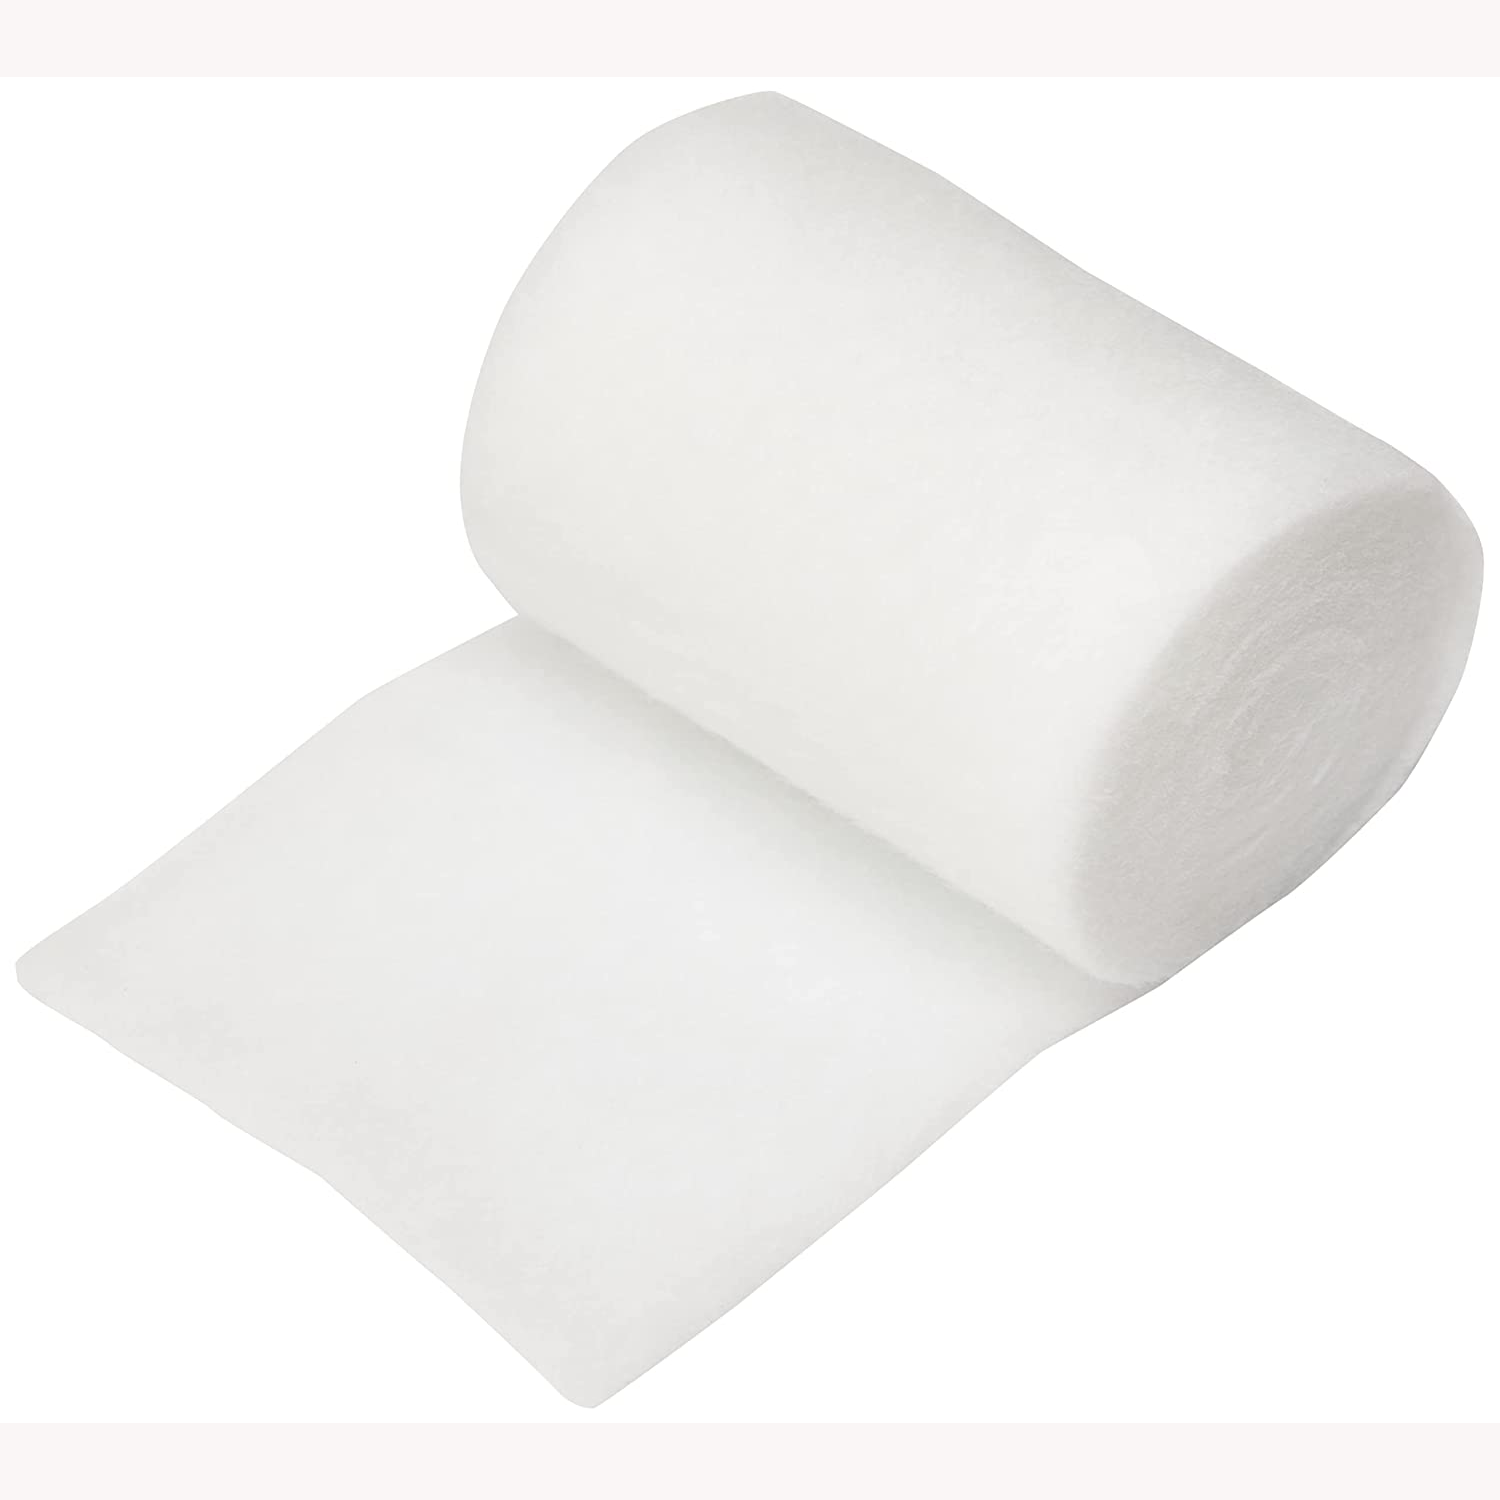 Soffban Synthetic Padding | 10cm x 2.7m | Pack of 12 (2)